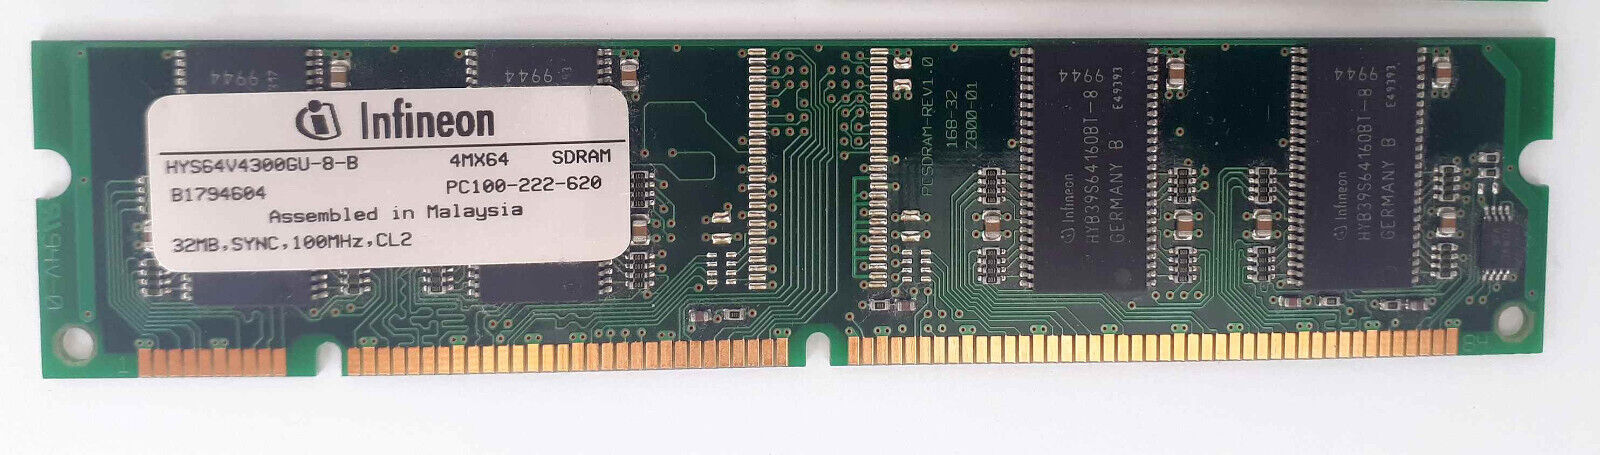 SDRAM PC66 - PC133, Memory 32MB - 256MB, 168 pin for vintage PC